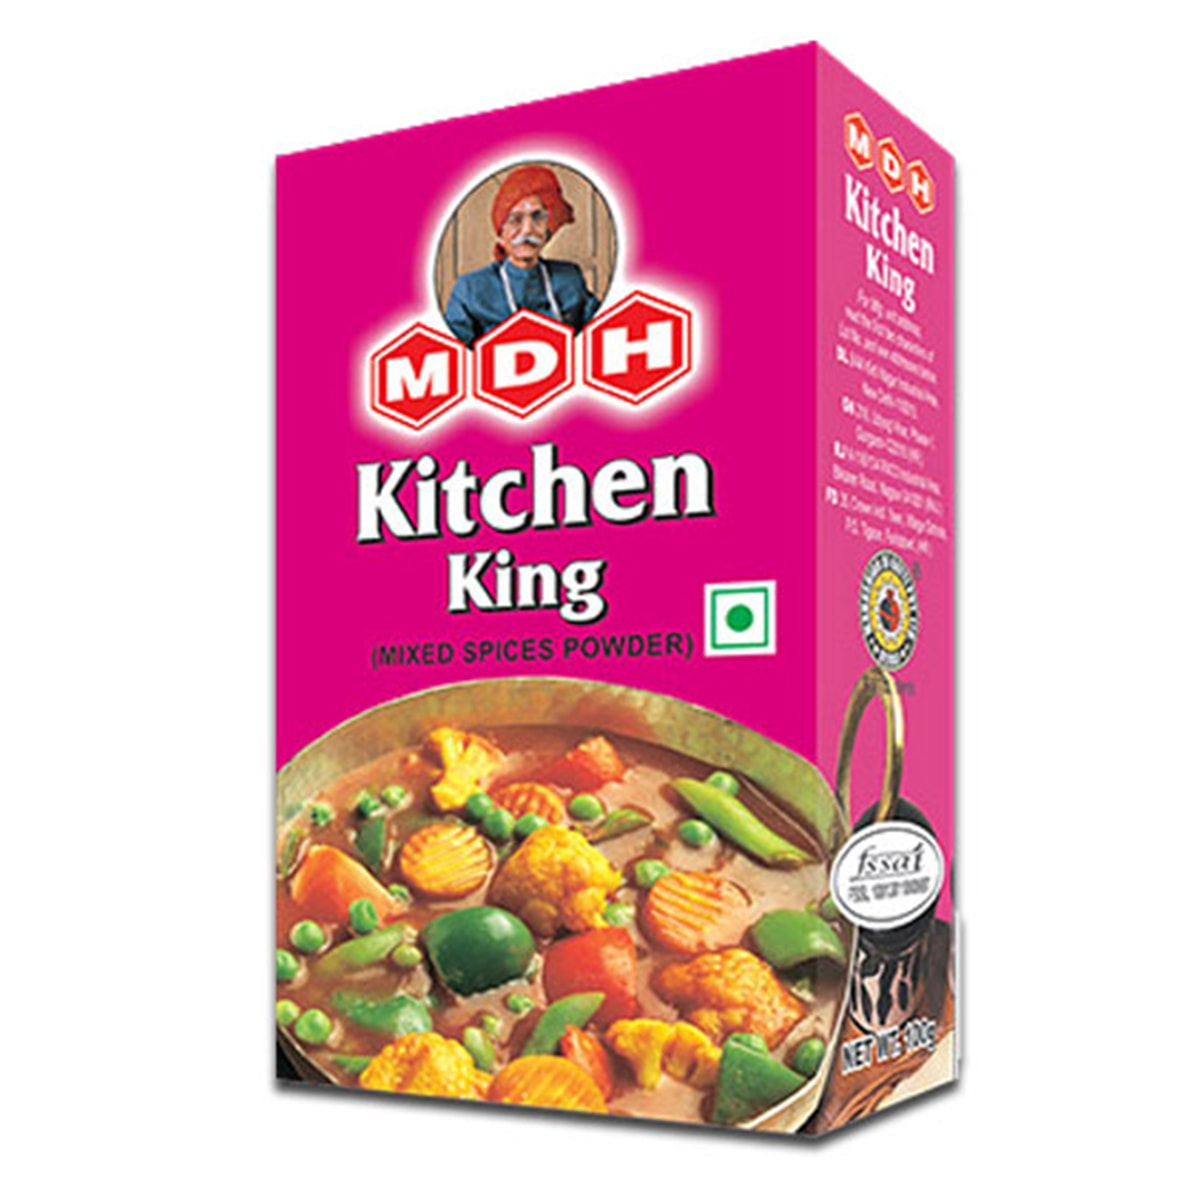 Buy MDH Kitchen King (Mixed Spices Powder) - 100 gm